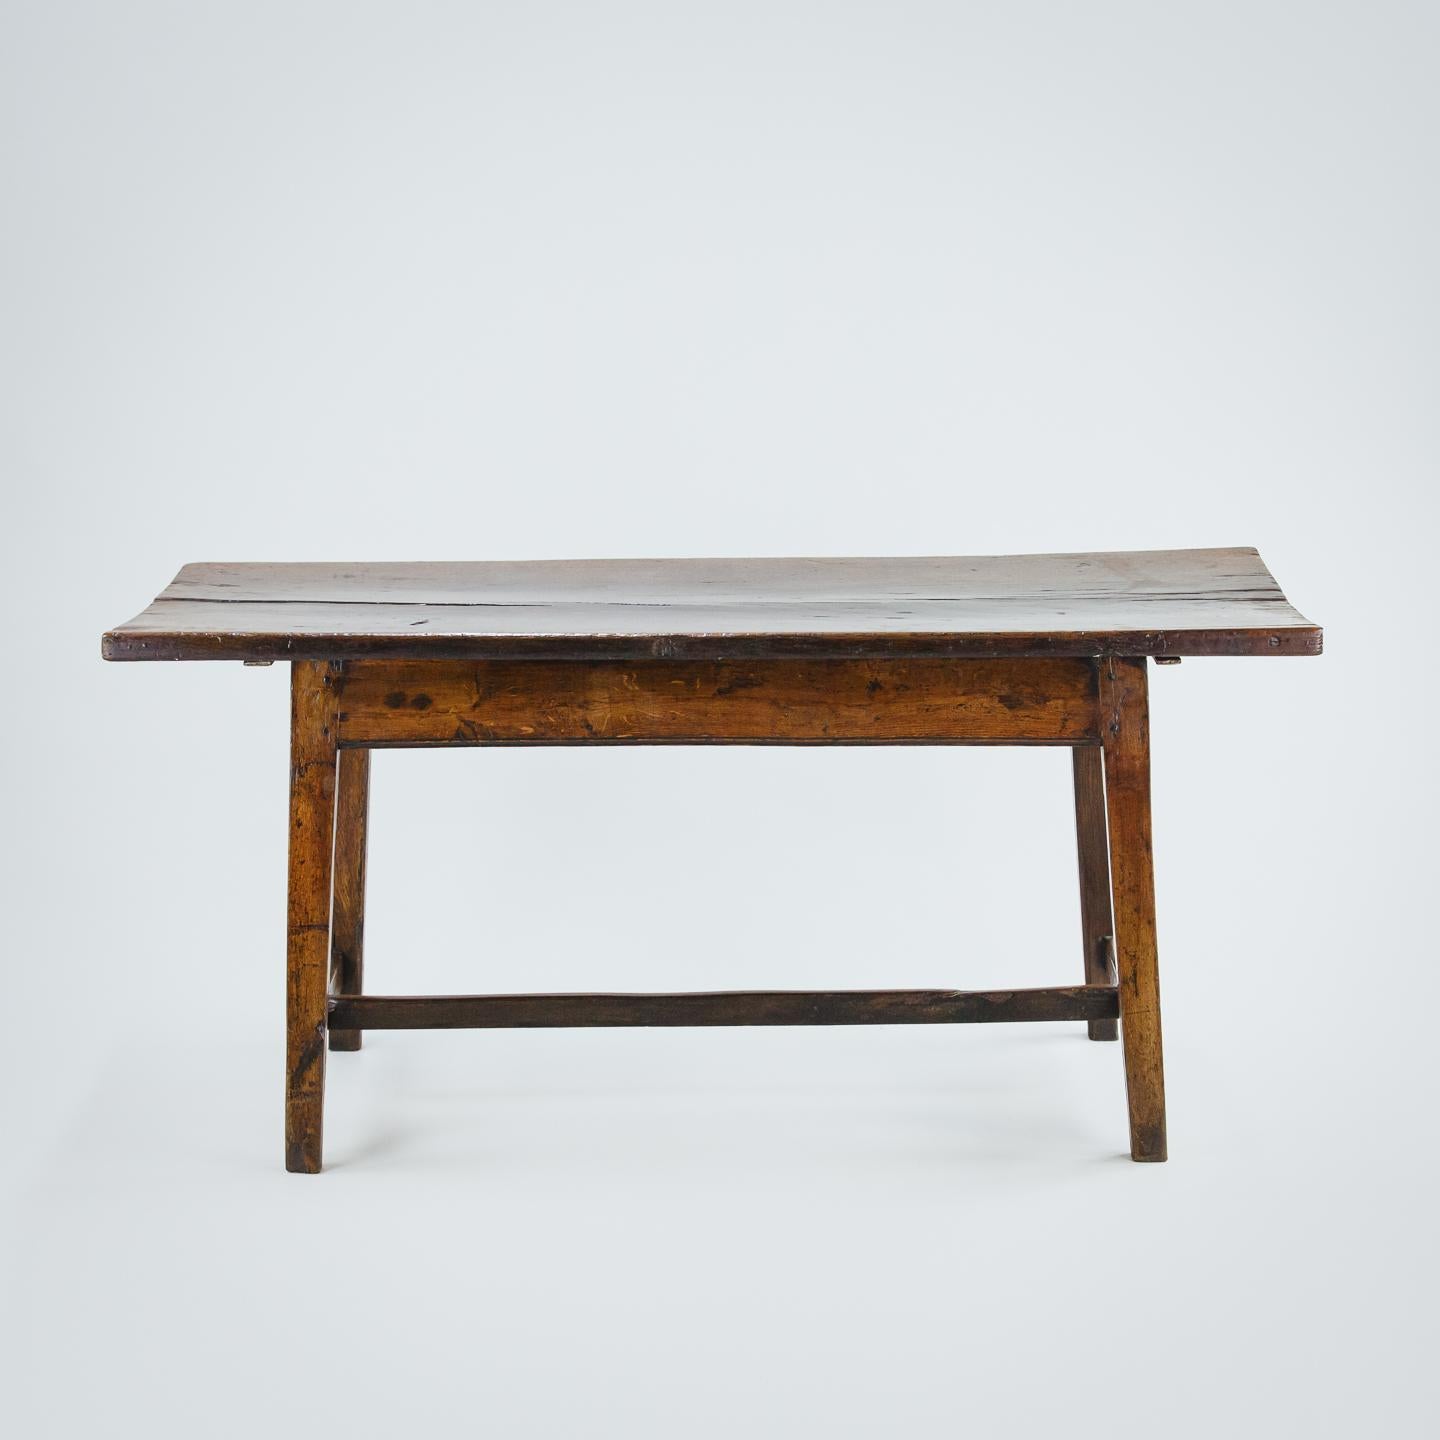 Extraordinary Georgian welsh single plank oak farmhouse table, good colour, patination and wear to stretchers and top. Unusual decorative lozenge inlay most likely in holly on the apron or skirt. 

Some minor bowing of the top some drying splits